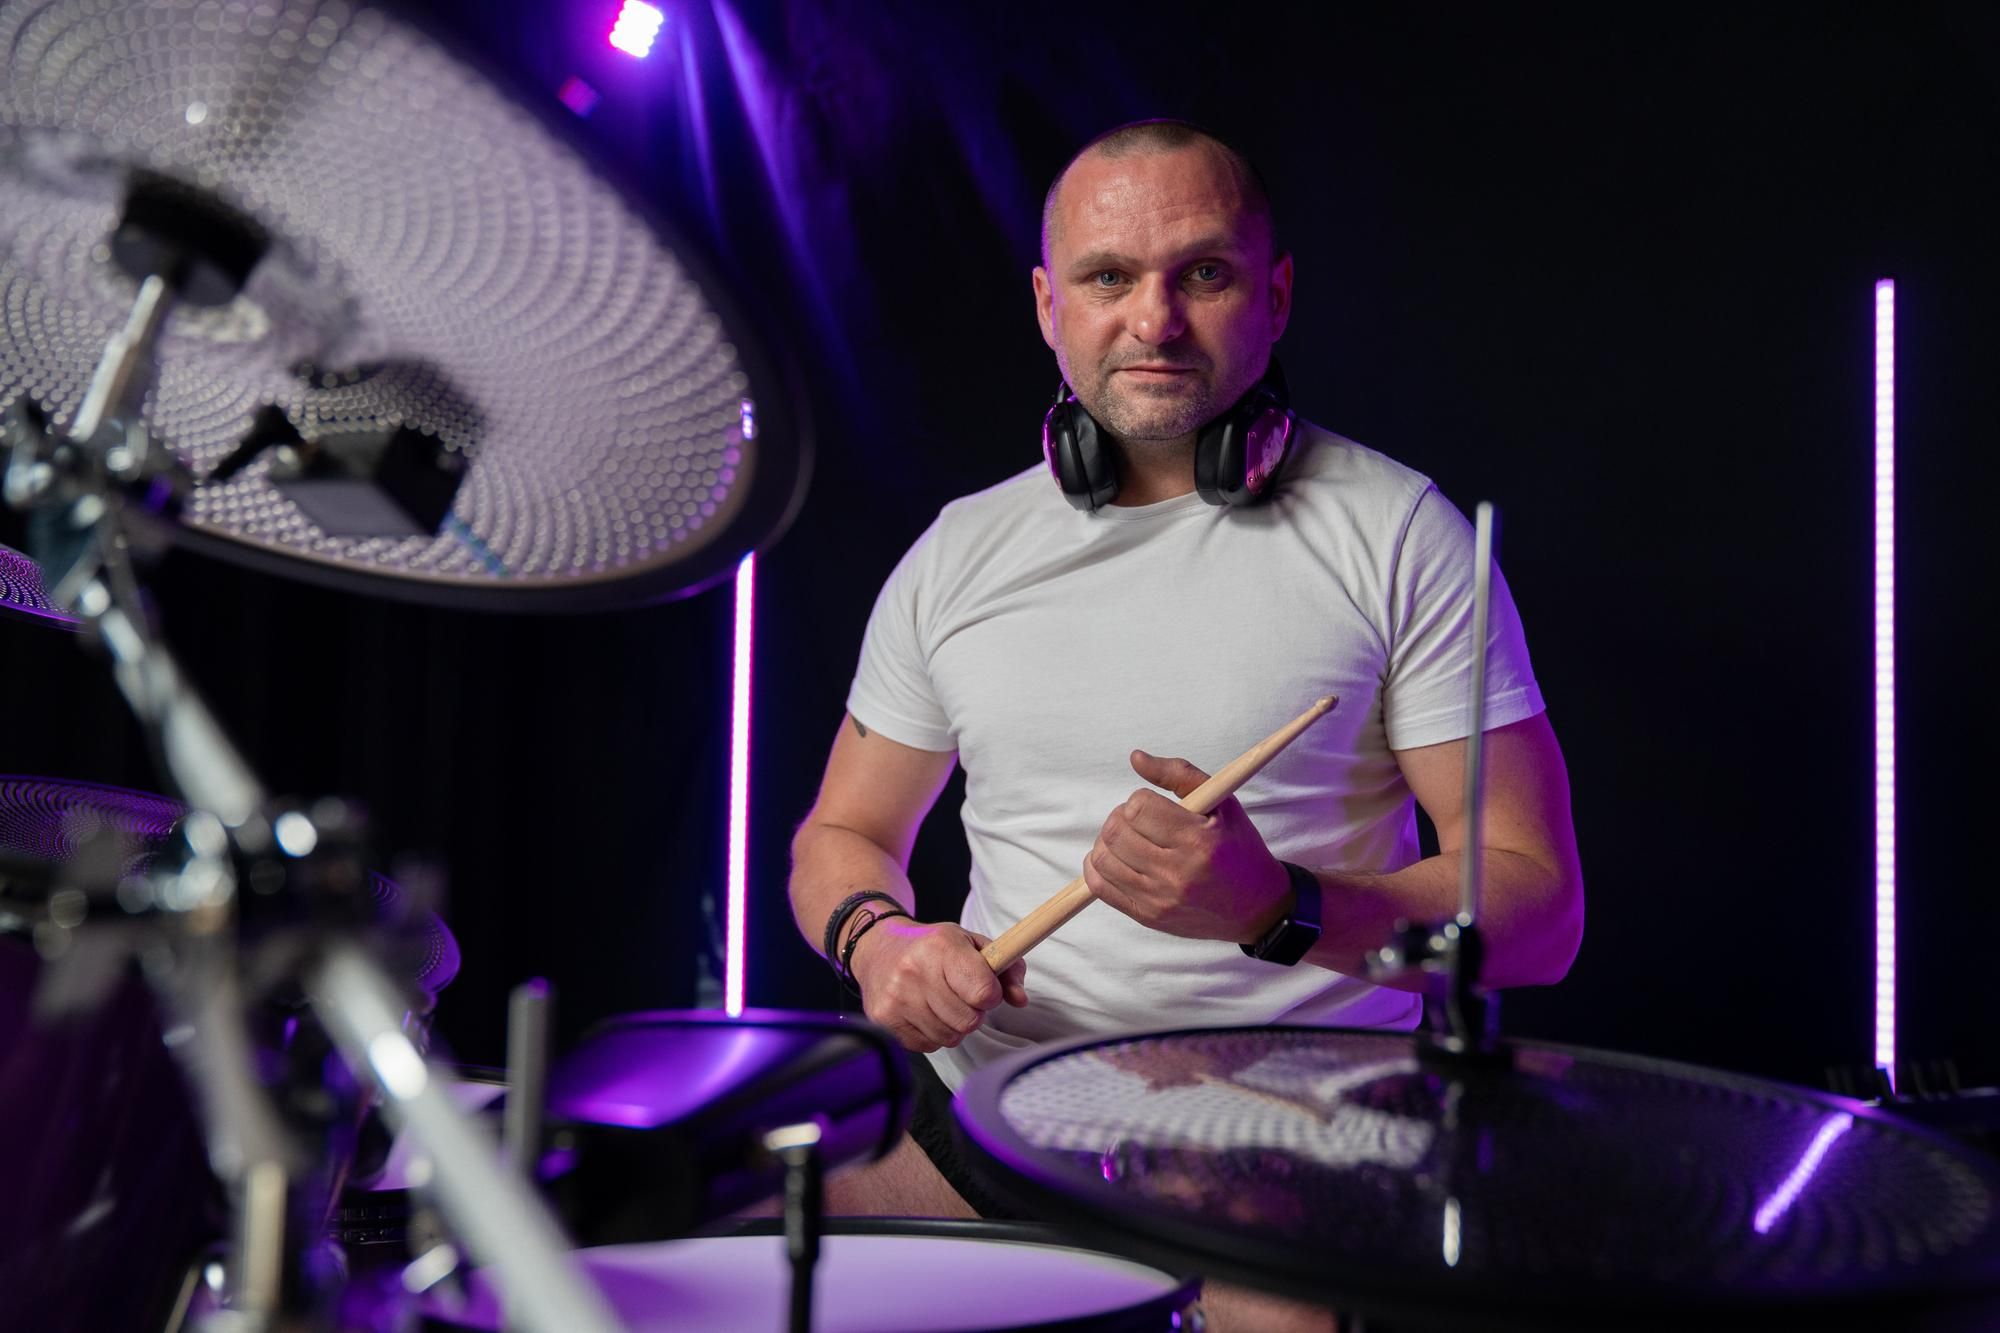 Champion of the world as Lisburn man smashes drumming record